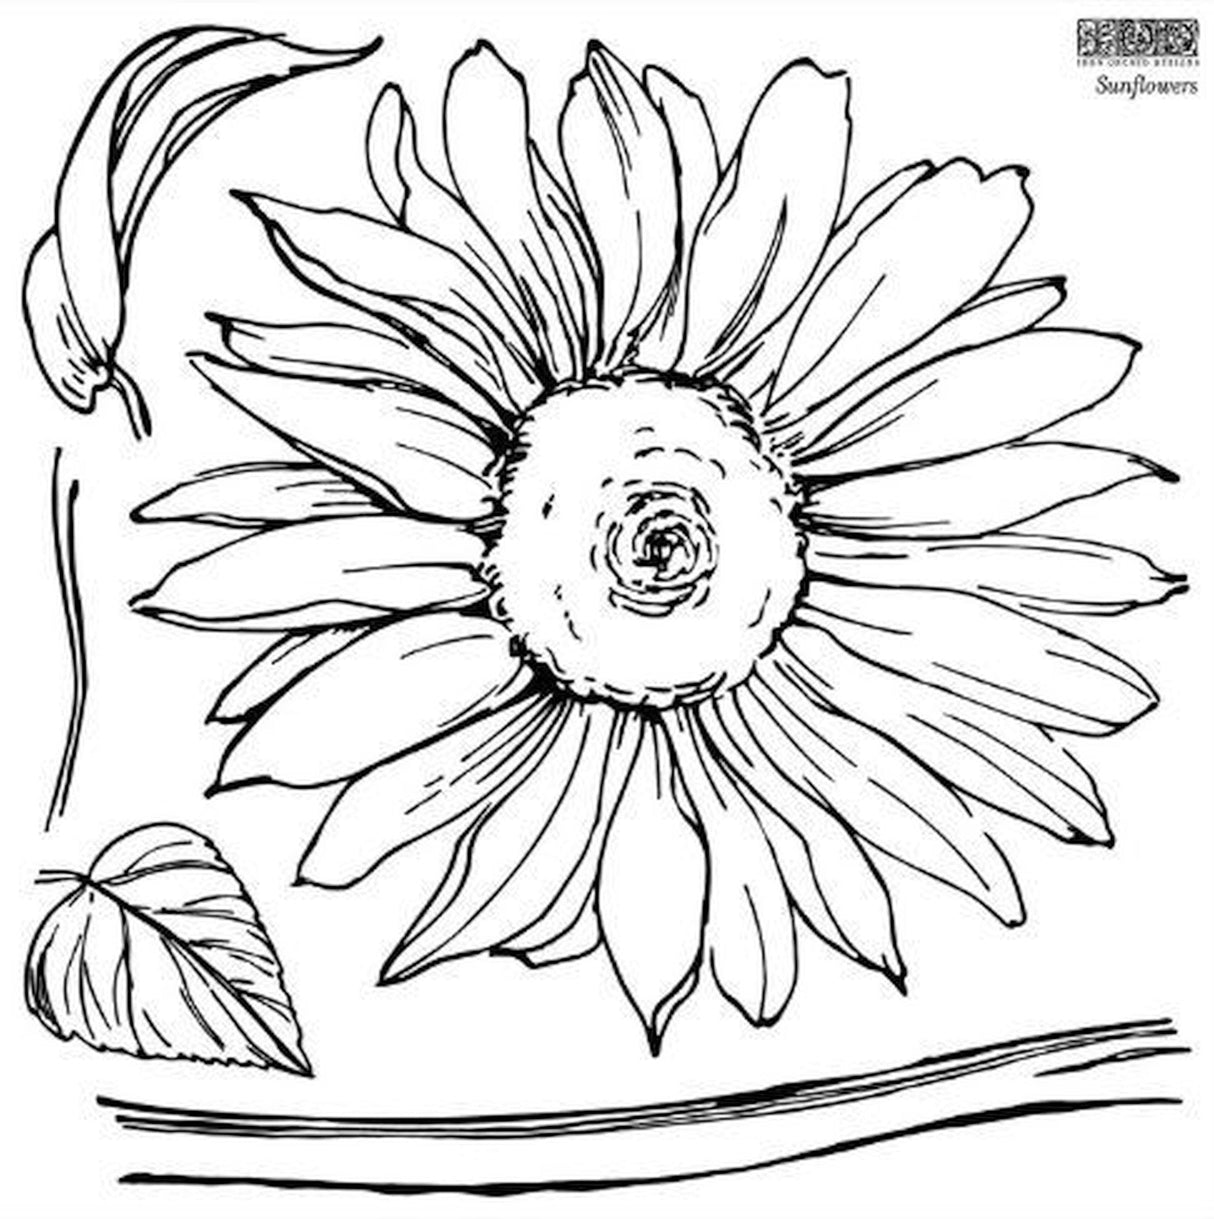 Sunflowers Decor Stamp by IOD - Iron Orchid Designs @ Painted Heirloom